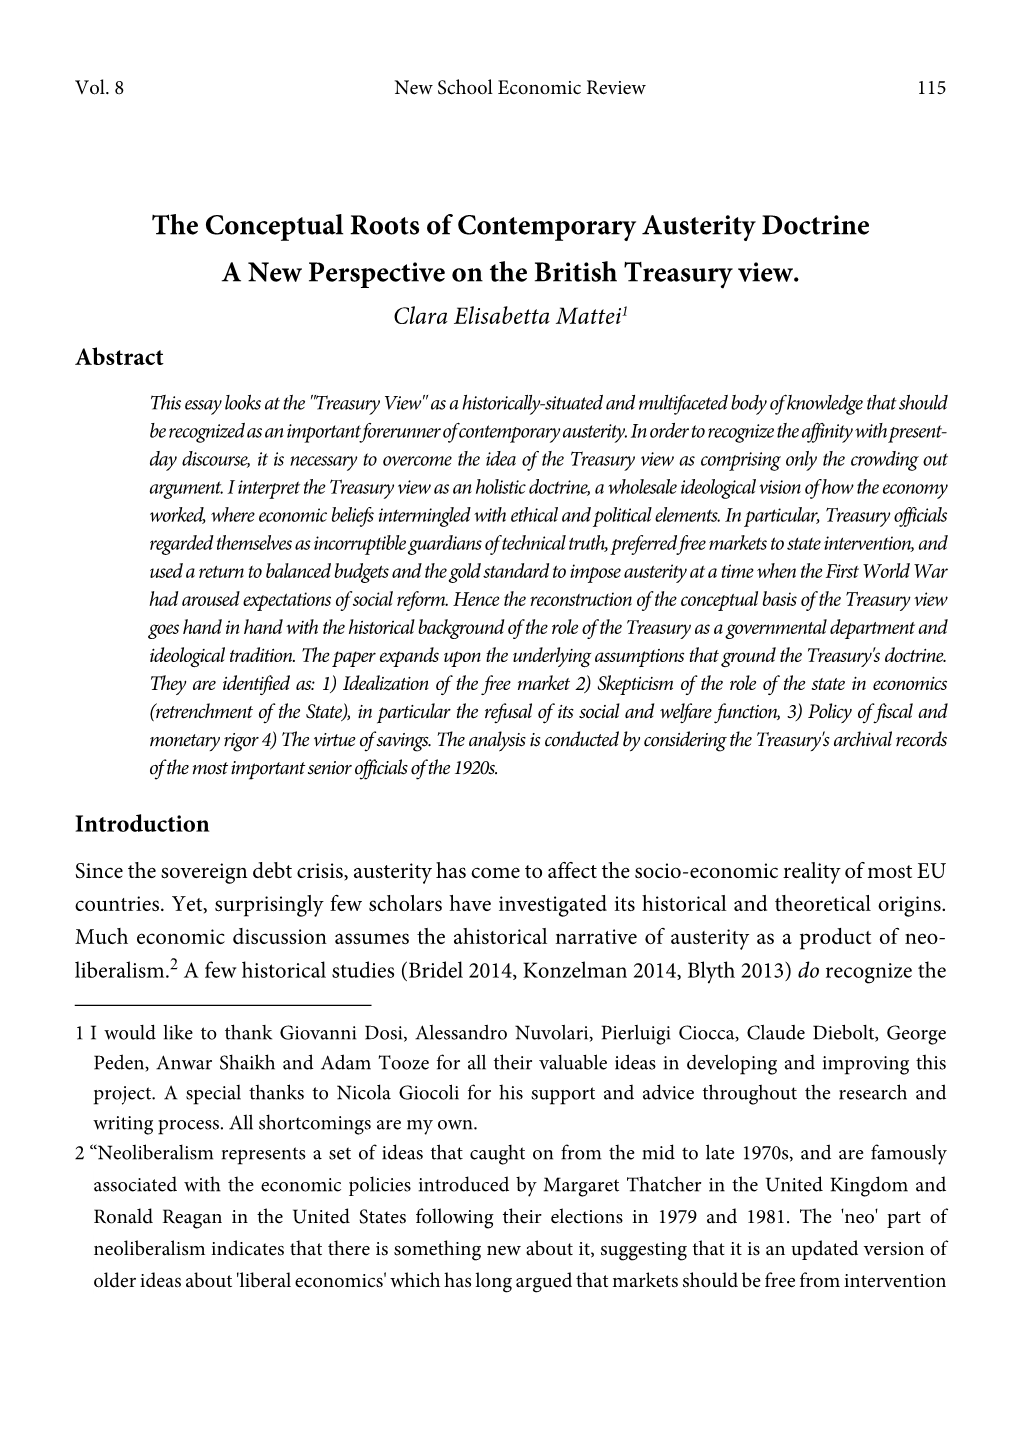 The Conceptual Roots of Contemporary Austerity Doctrine a New Perspective on the British Treasury View. Clara Elisabetta Mattei1 Abstract